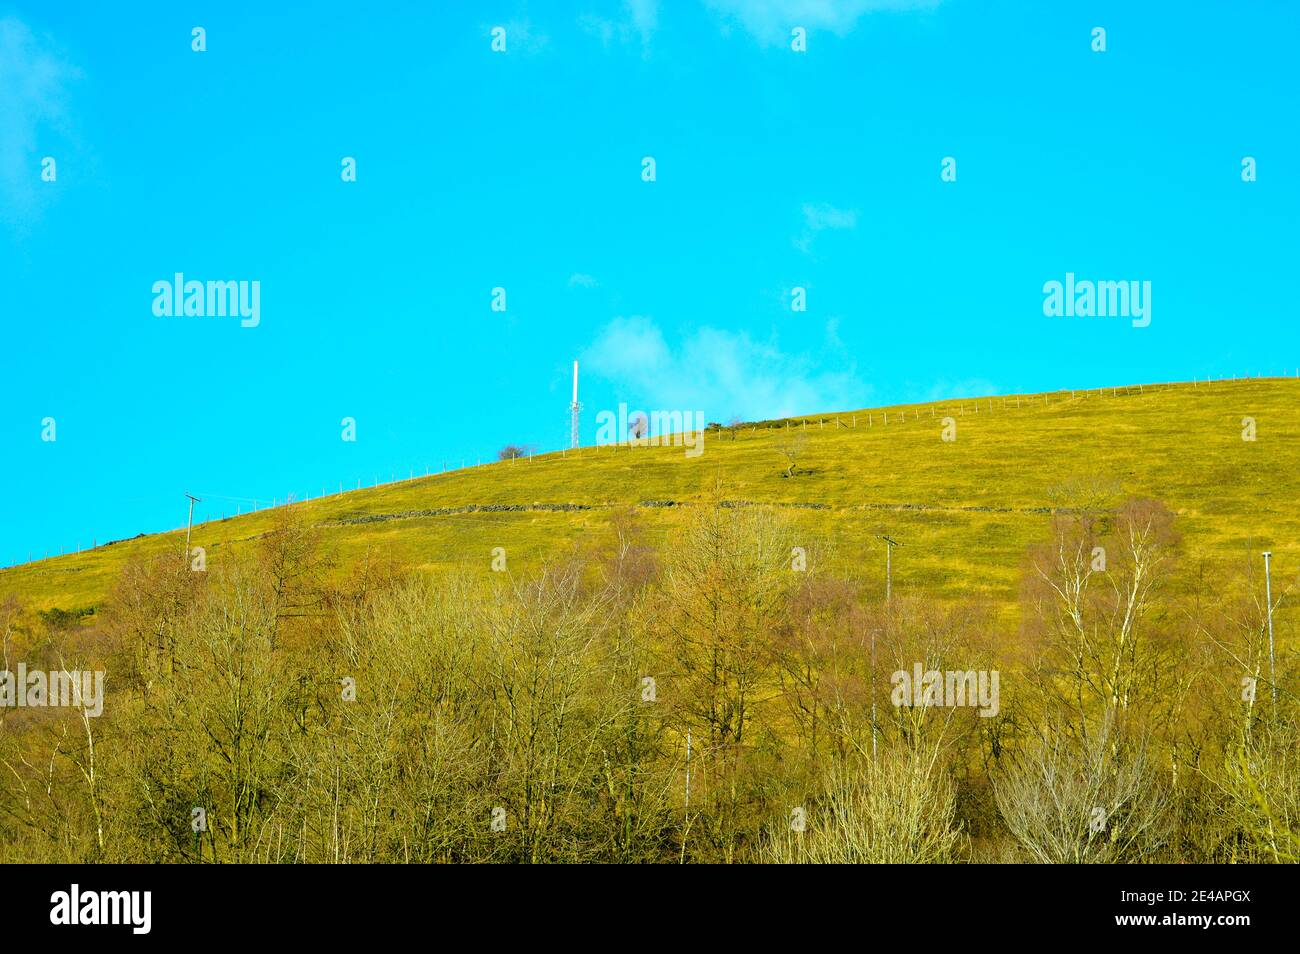 Saddleworth radio and TV transmitter on top of a hill in Saddleworth, Oldham Stock Photo